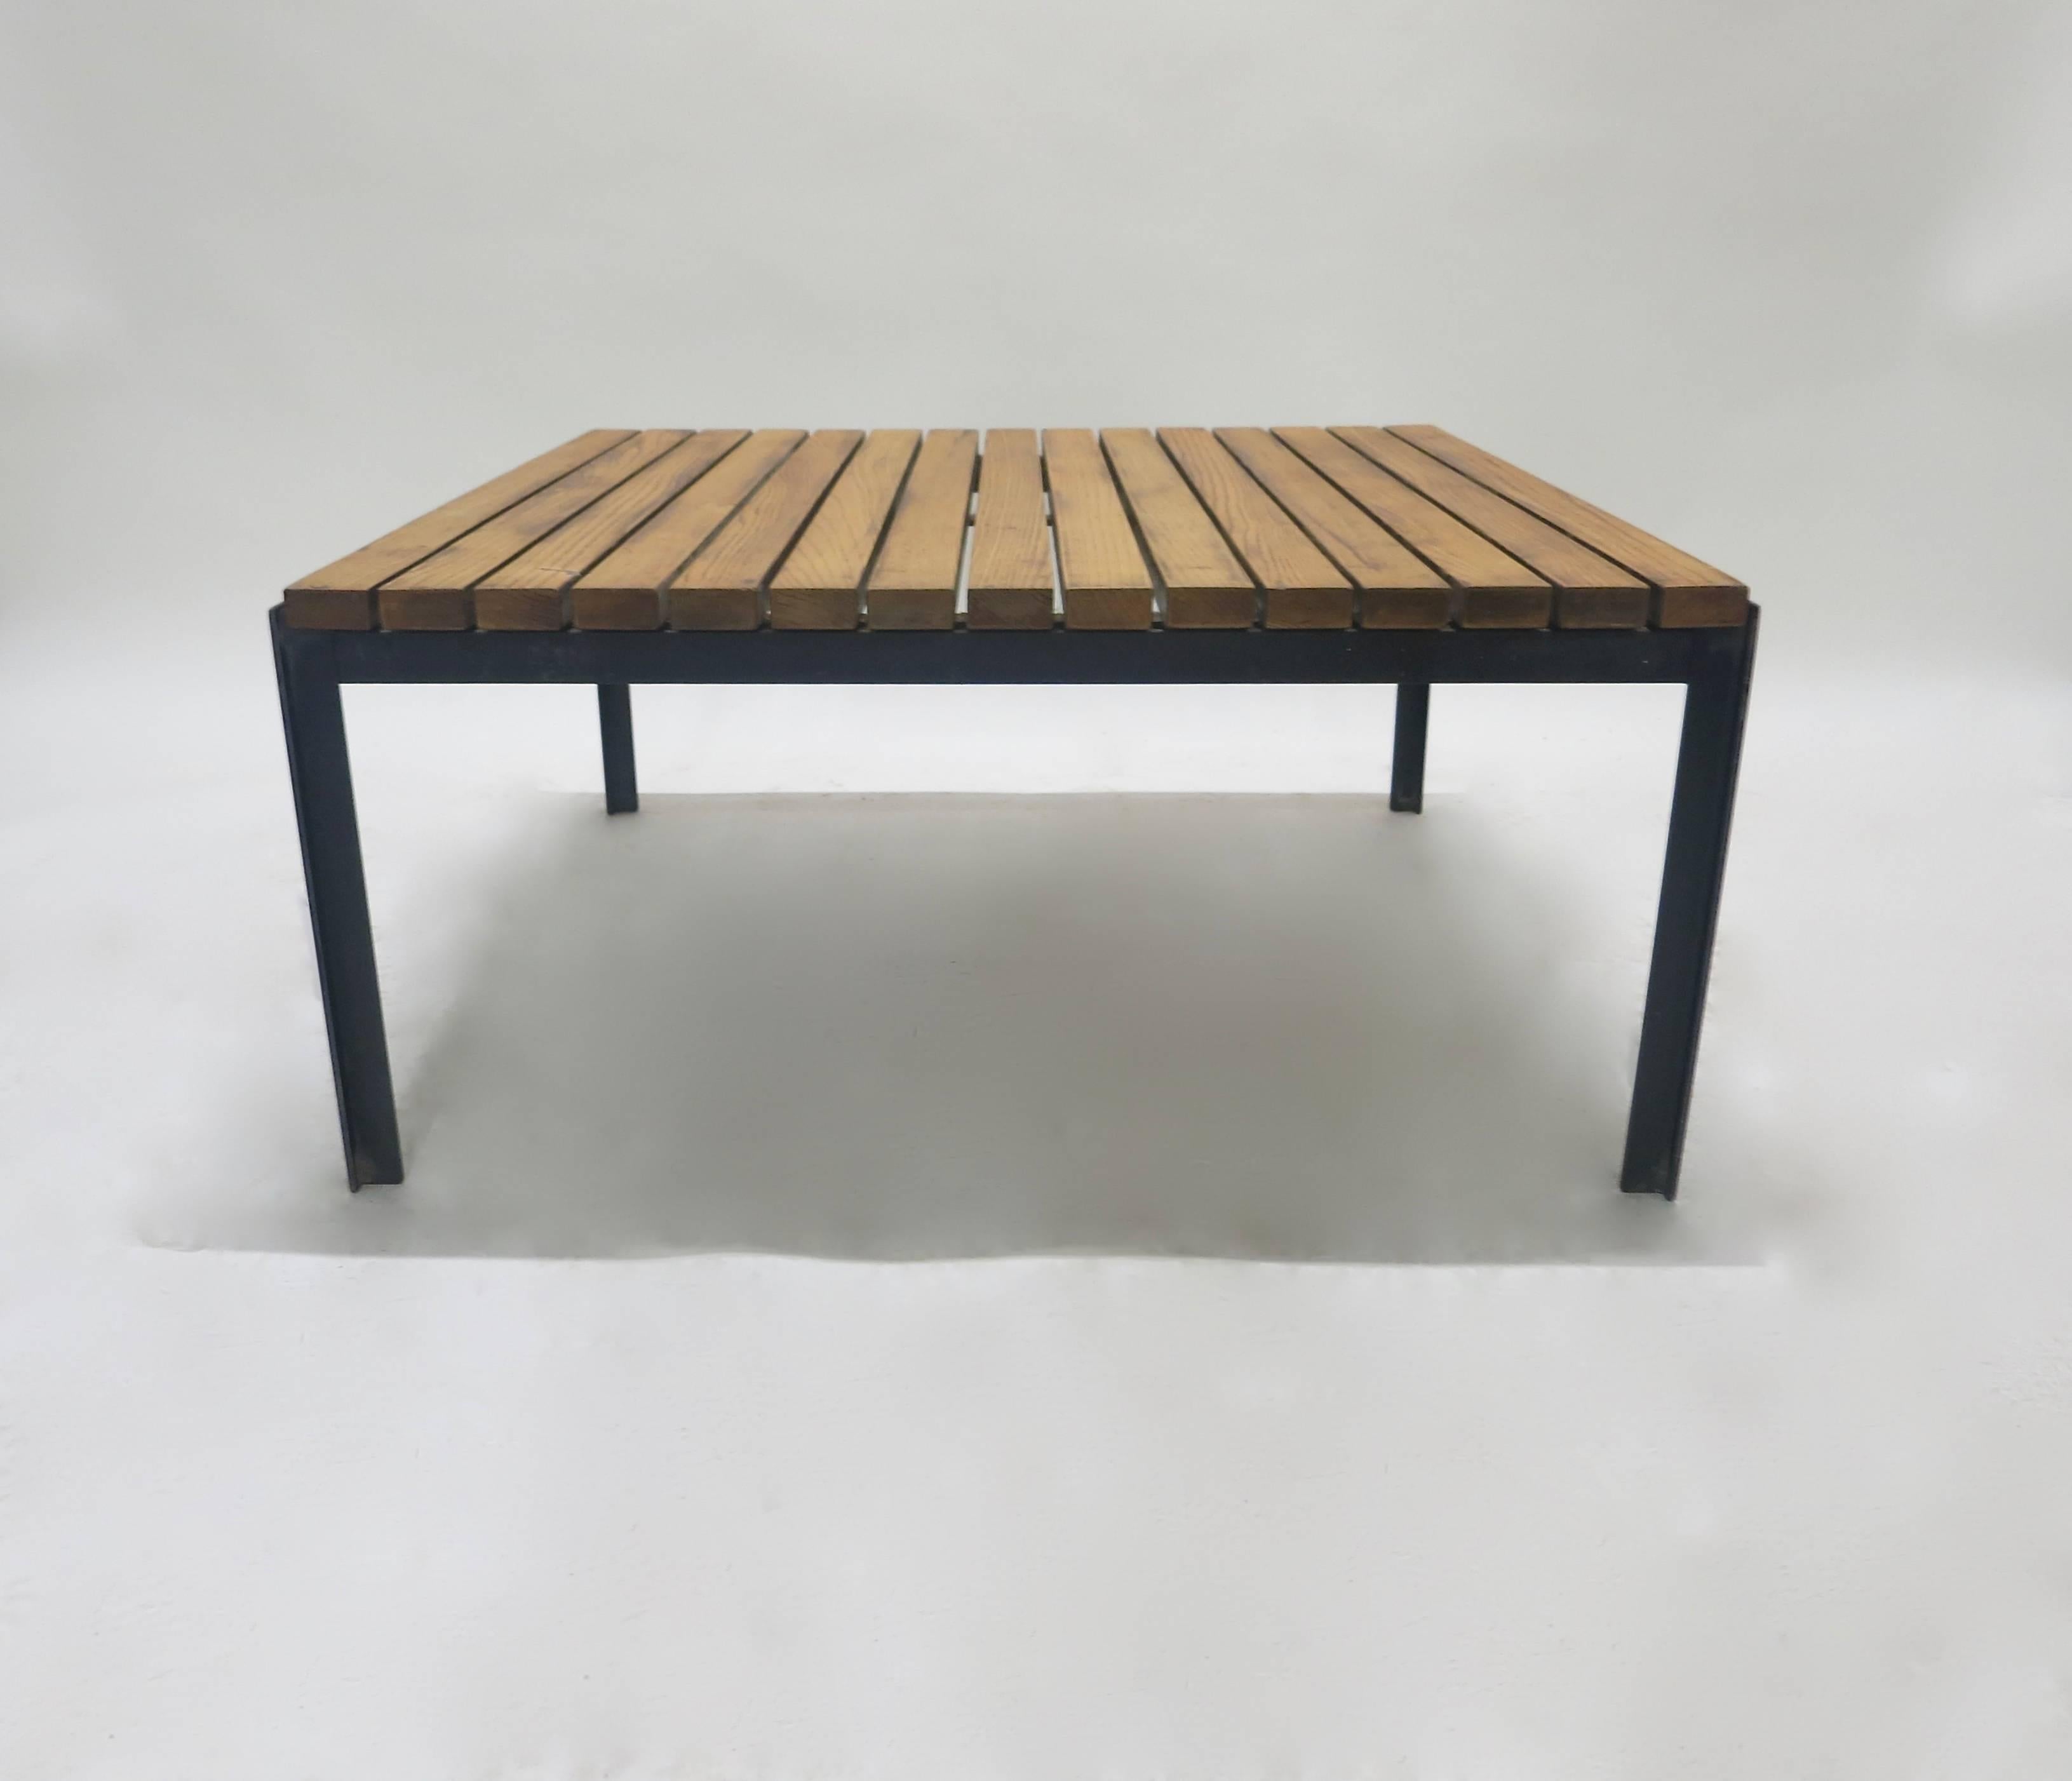 Mid-Century Modern Slatted T-Bar Table by Florence Knoll for Knoll Associates, circa 1960 American